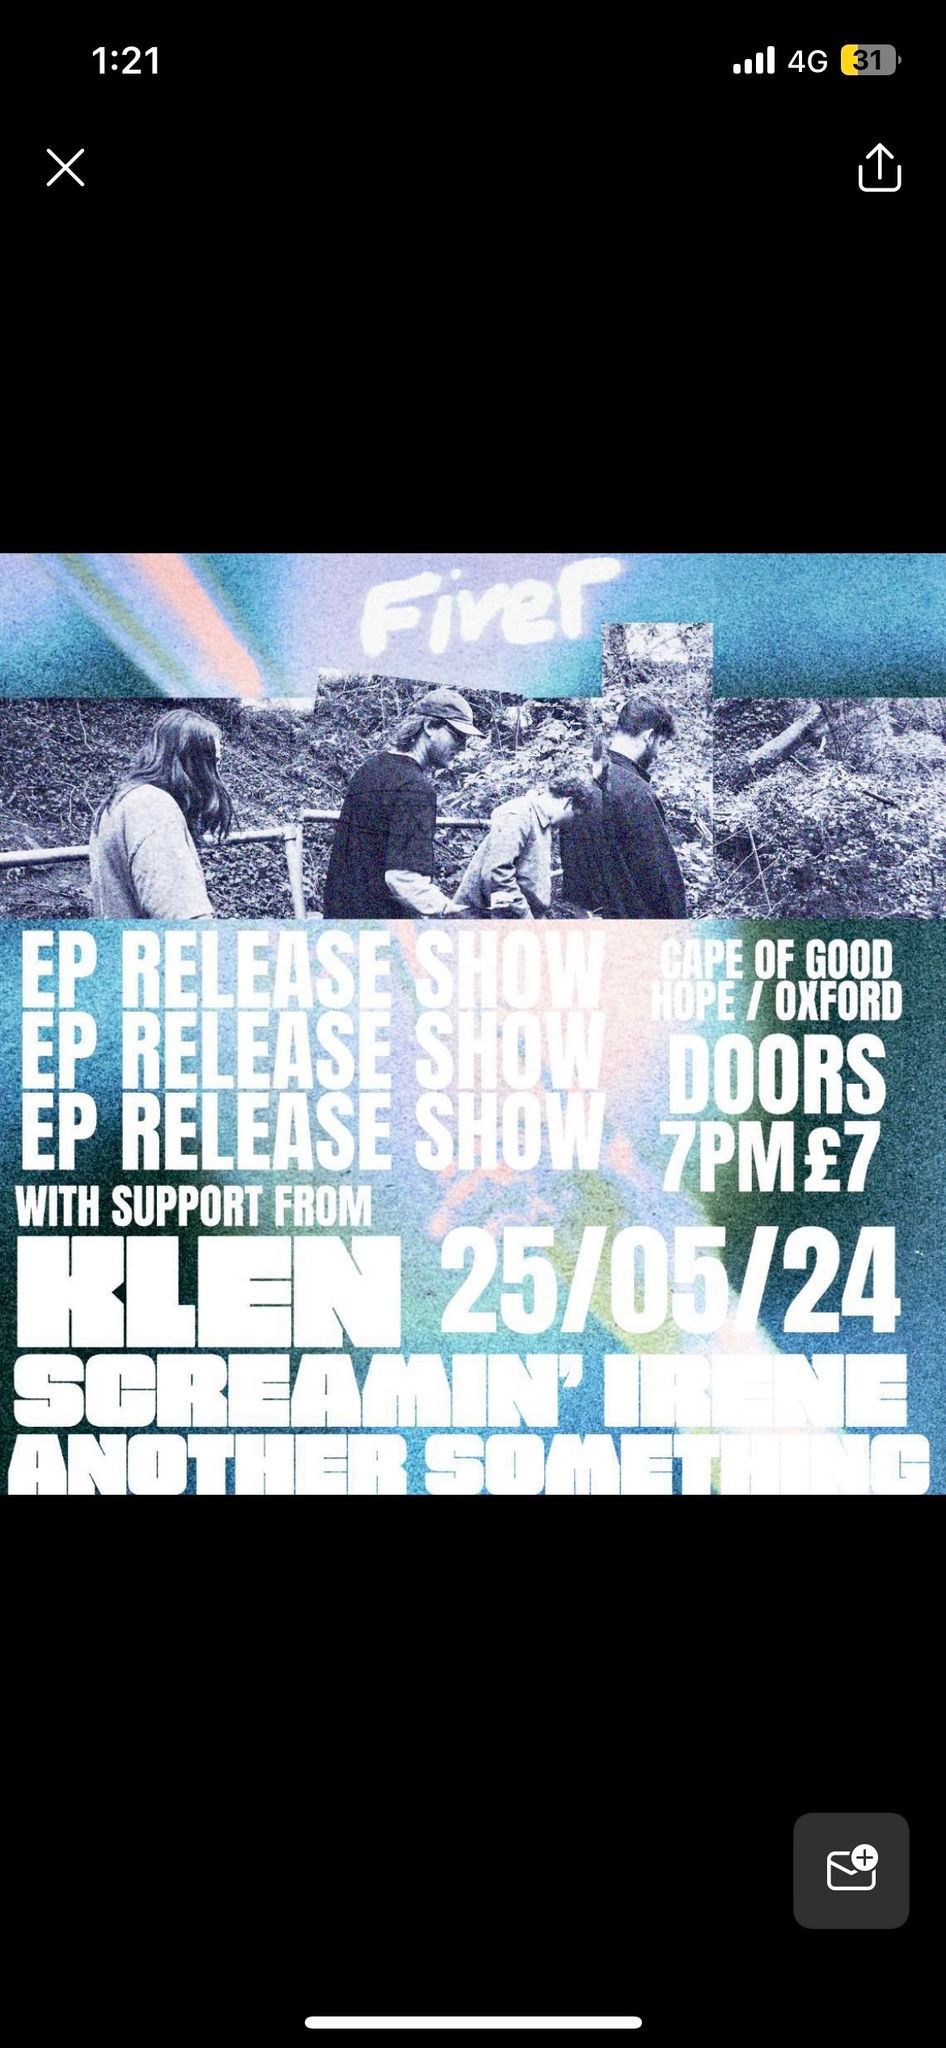 Fiver and special guests 